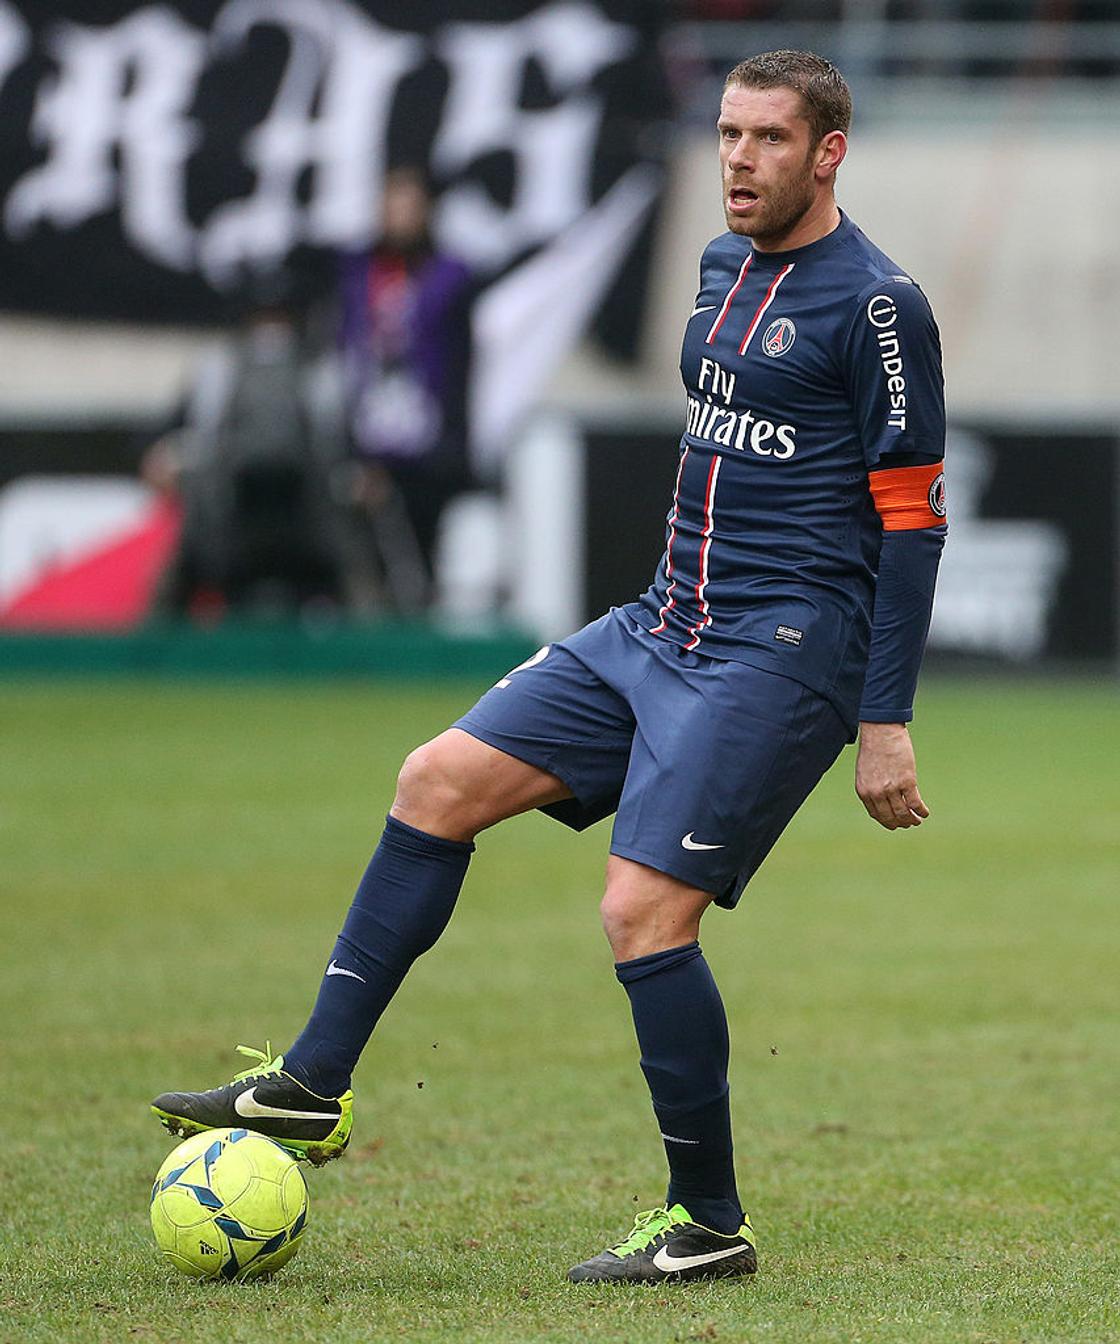 Sylvain Armand in action during a Ligue 1 match against Stade de Reims Champagne FC